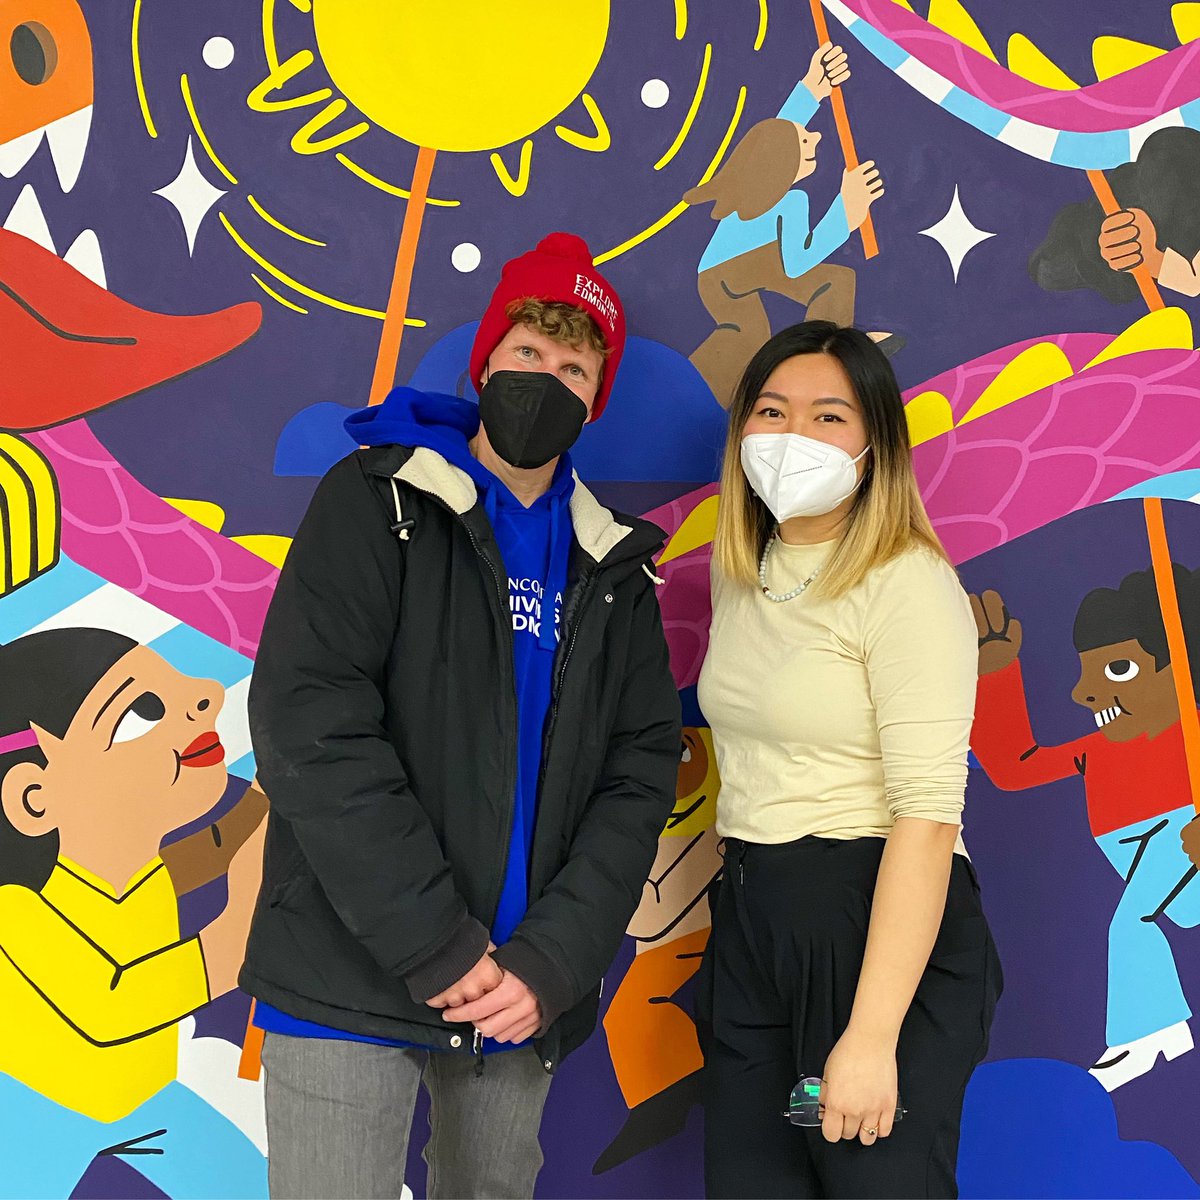 The fabulous @heyemilychu created a beautiful mural in the Edmonton Chinatown Multicultural Centre! So why not throw a party to celebrate its unveiling? 🎉 I’m so proud to represent Chinatown and every day, I’m inspired by people like Emily who build community through art 💙